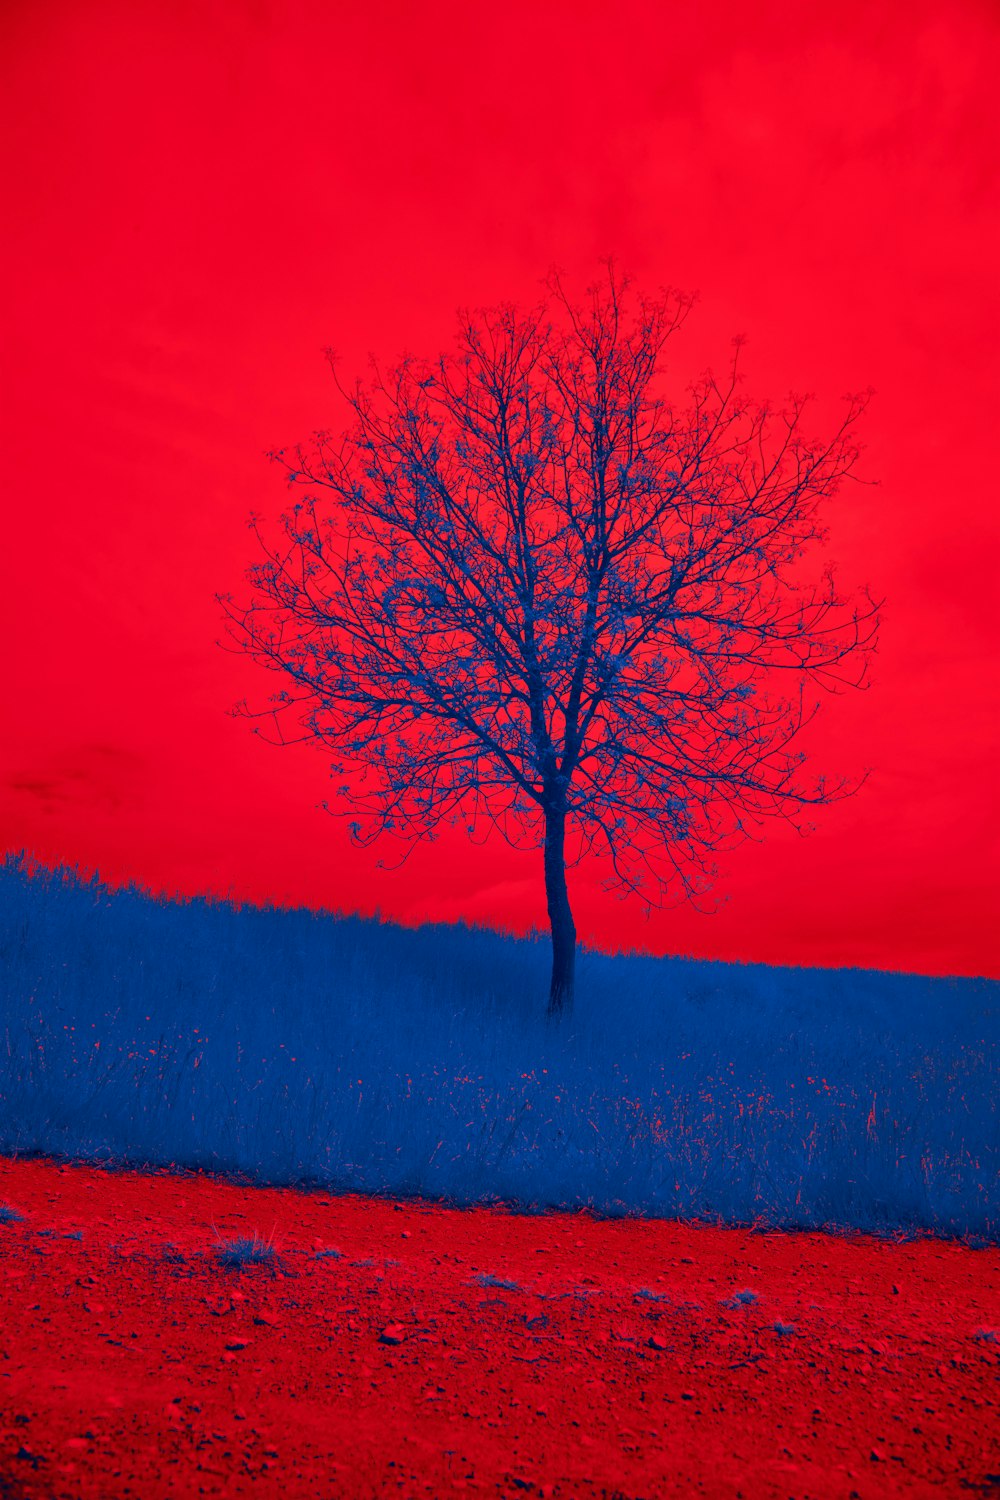 a lone tree in a field with a red sky in the background